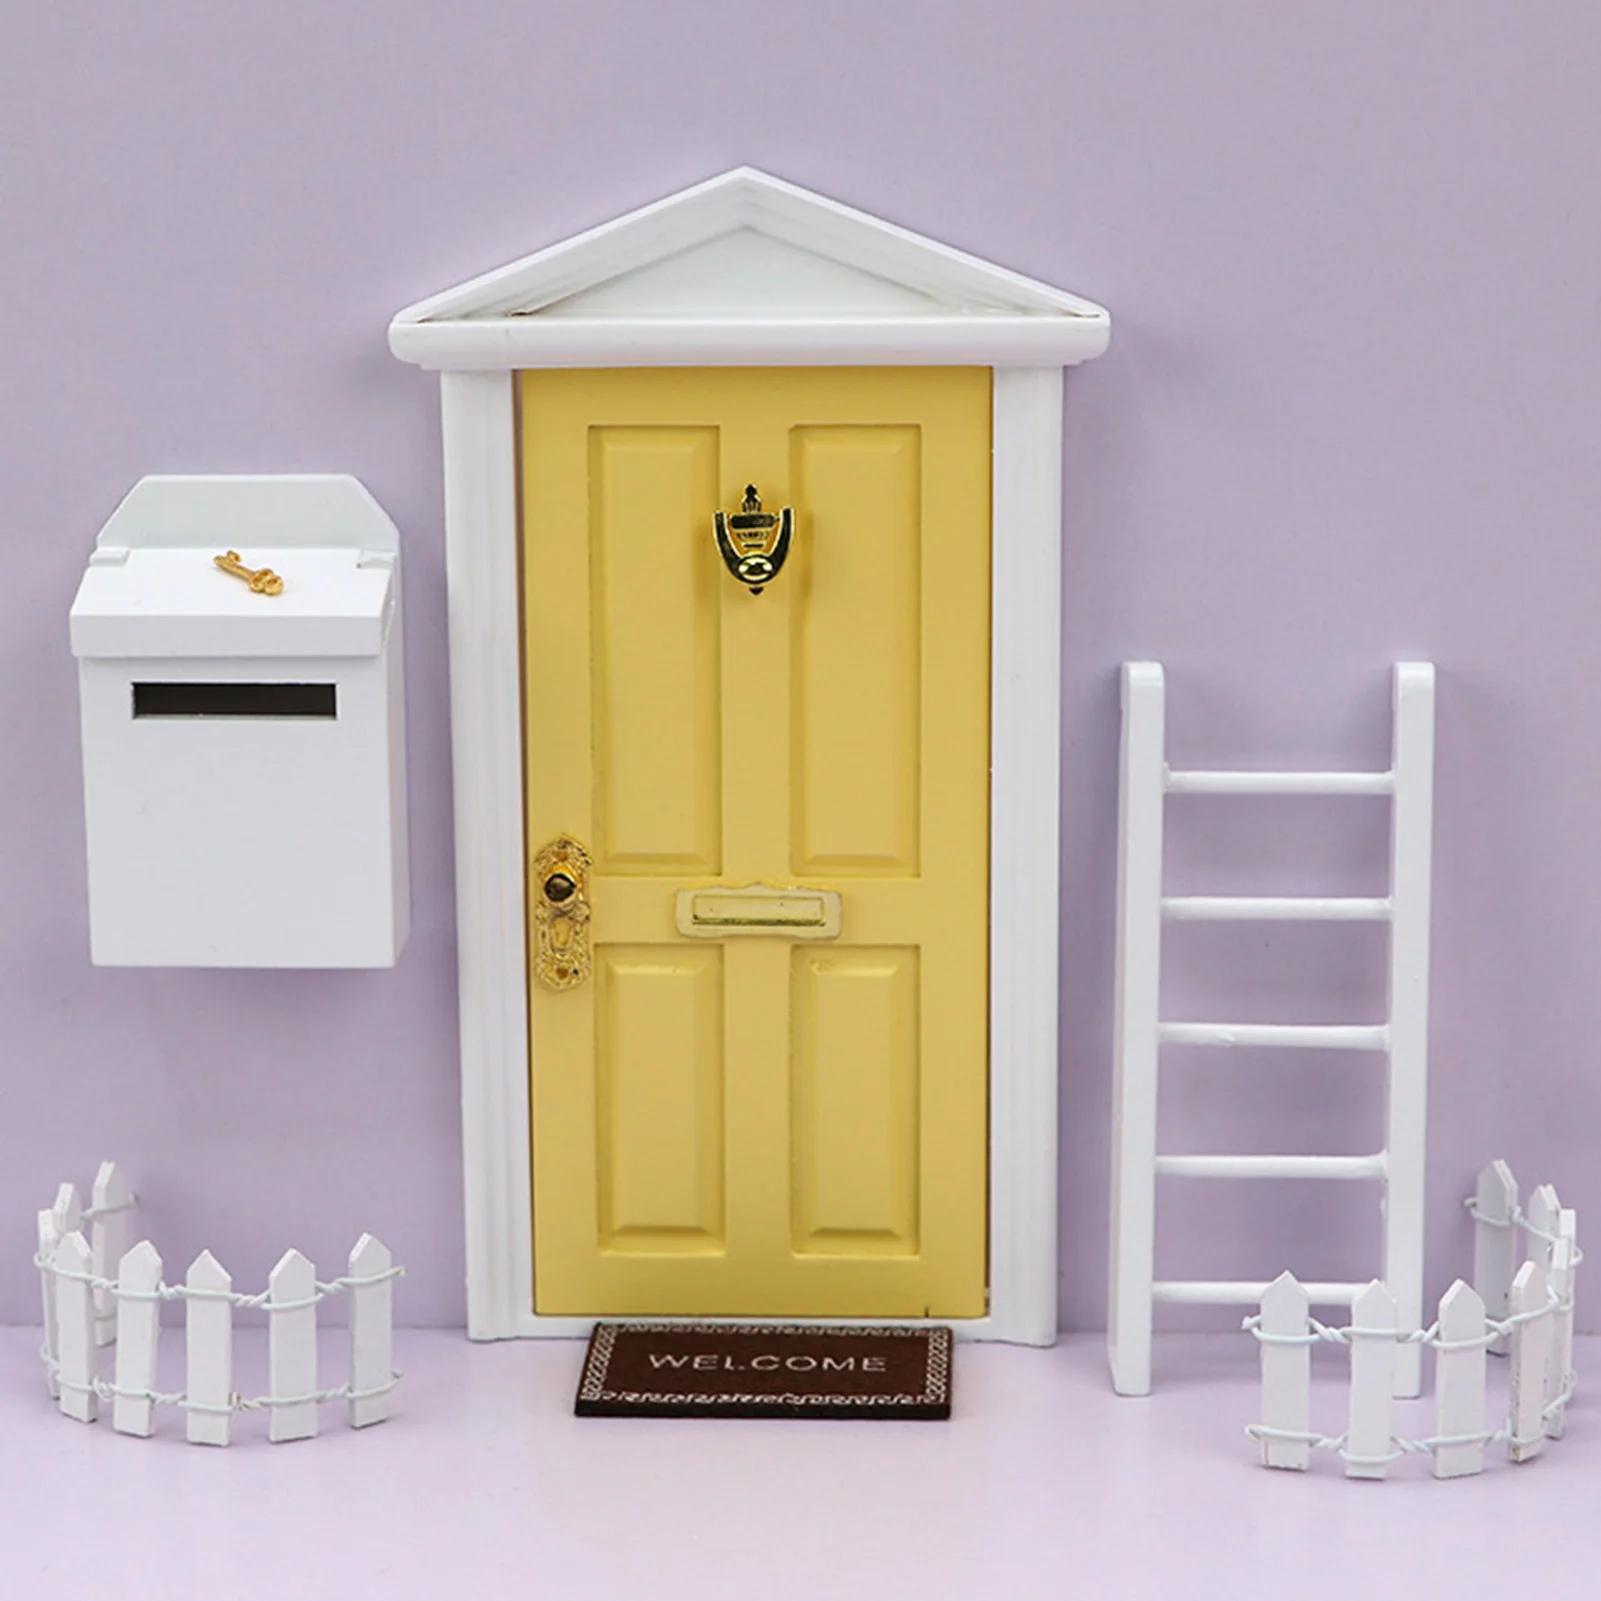 

Mini Fairy Door Cute Pink Mouse Hole 1:12 Miniature Dollhouse Furniture Wooden Door With Ladder Fence Mailbox Set Toys For Girl